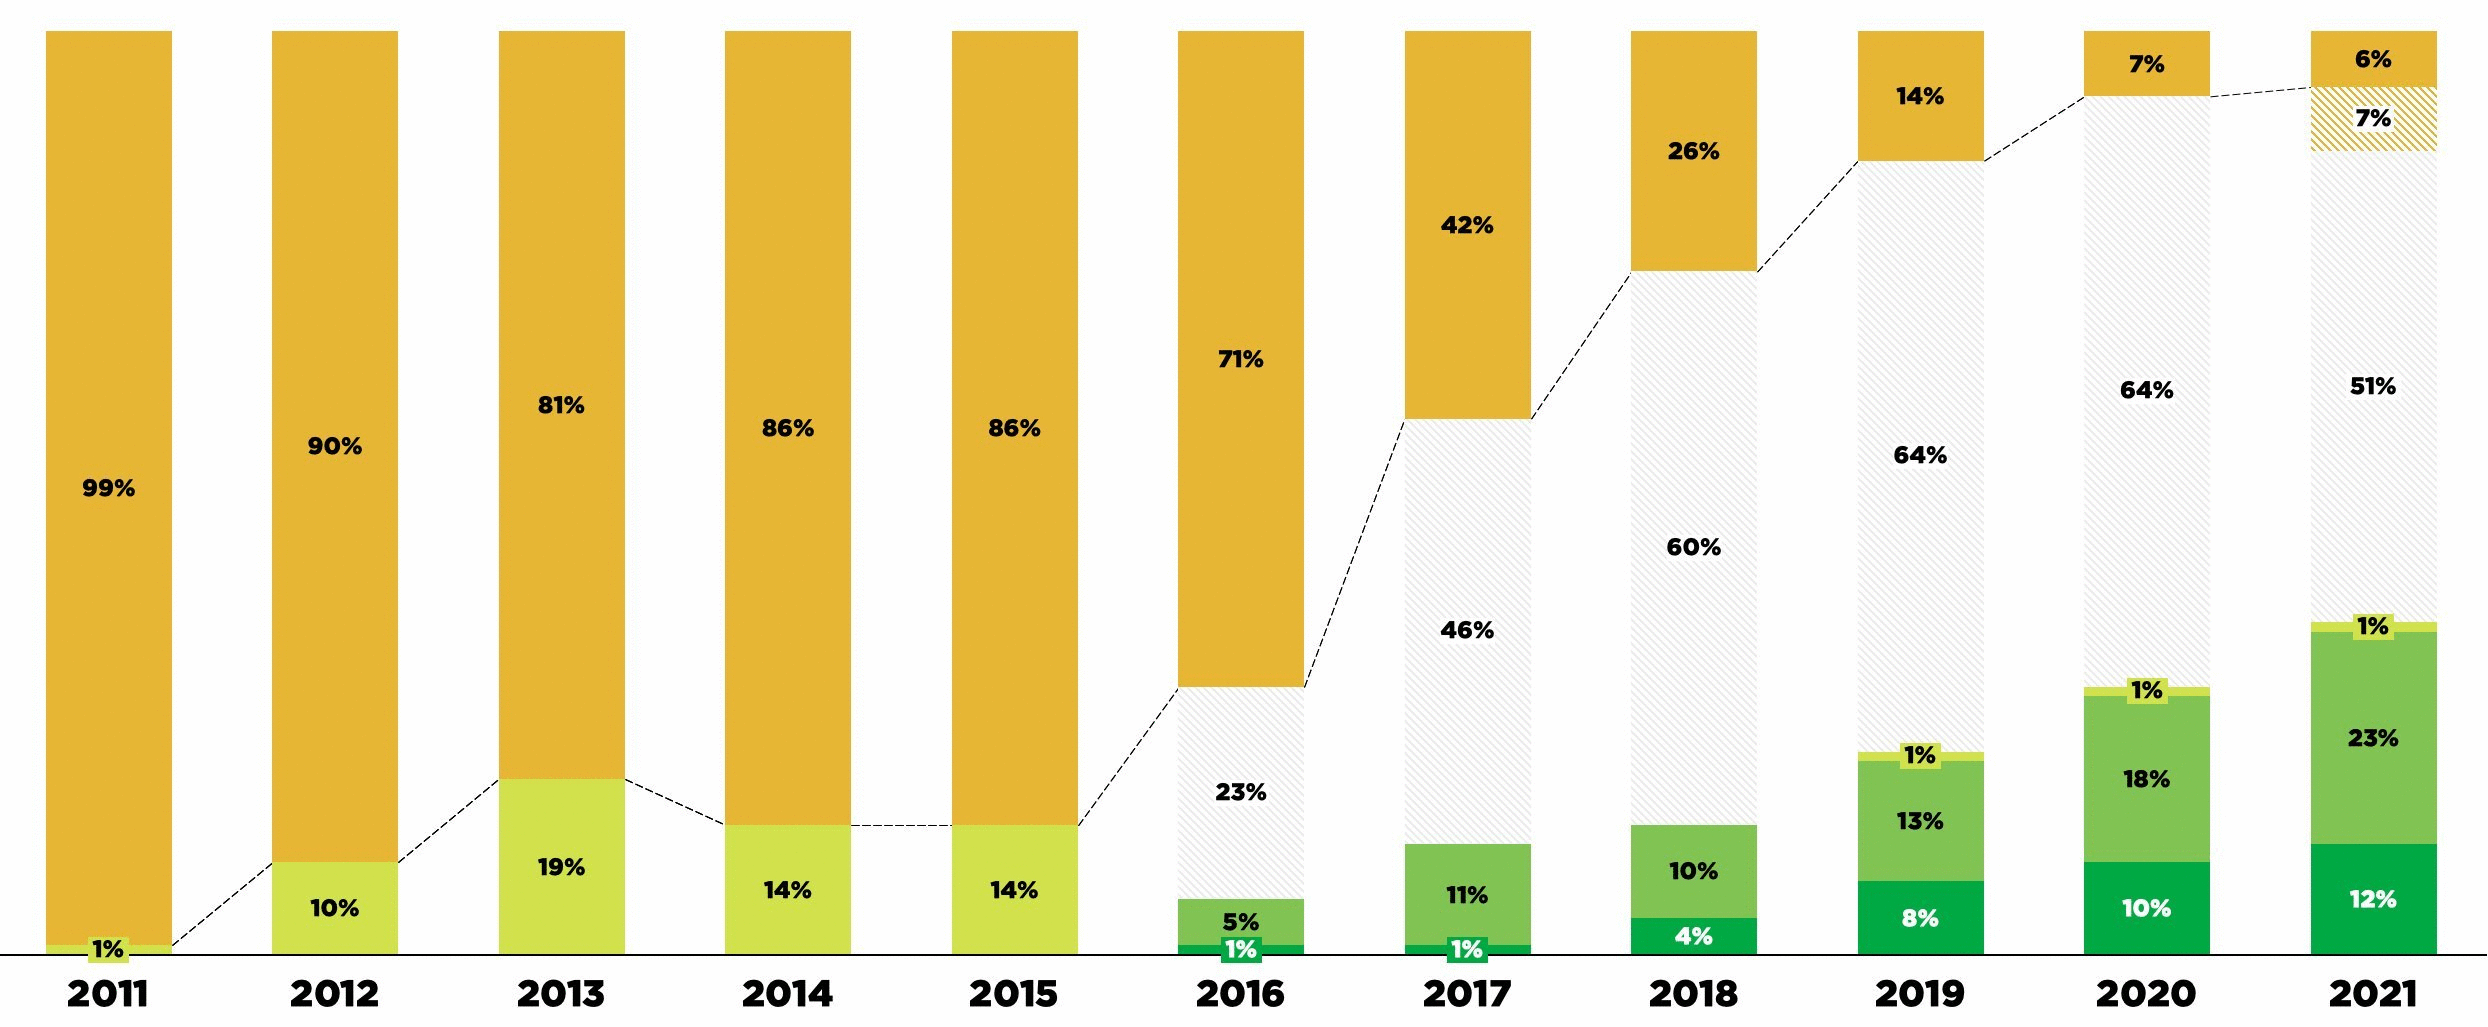 Bar graph on usage of sustainable materials from 2011 to 2021 in our main fabrics